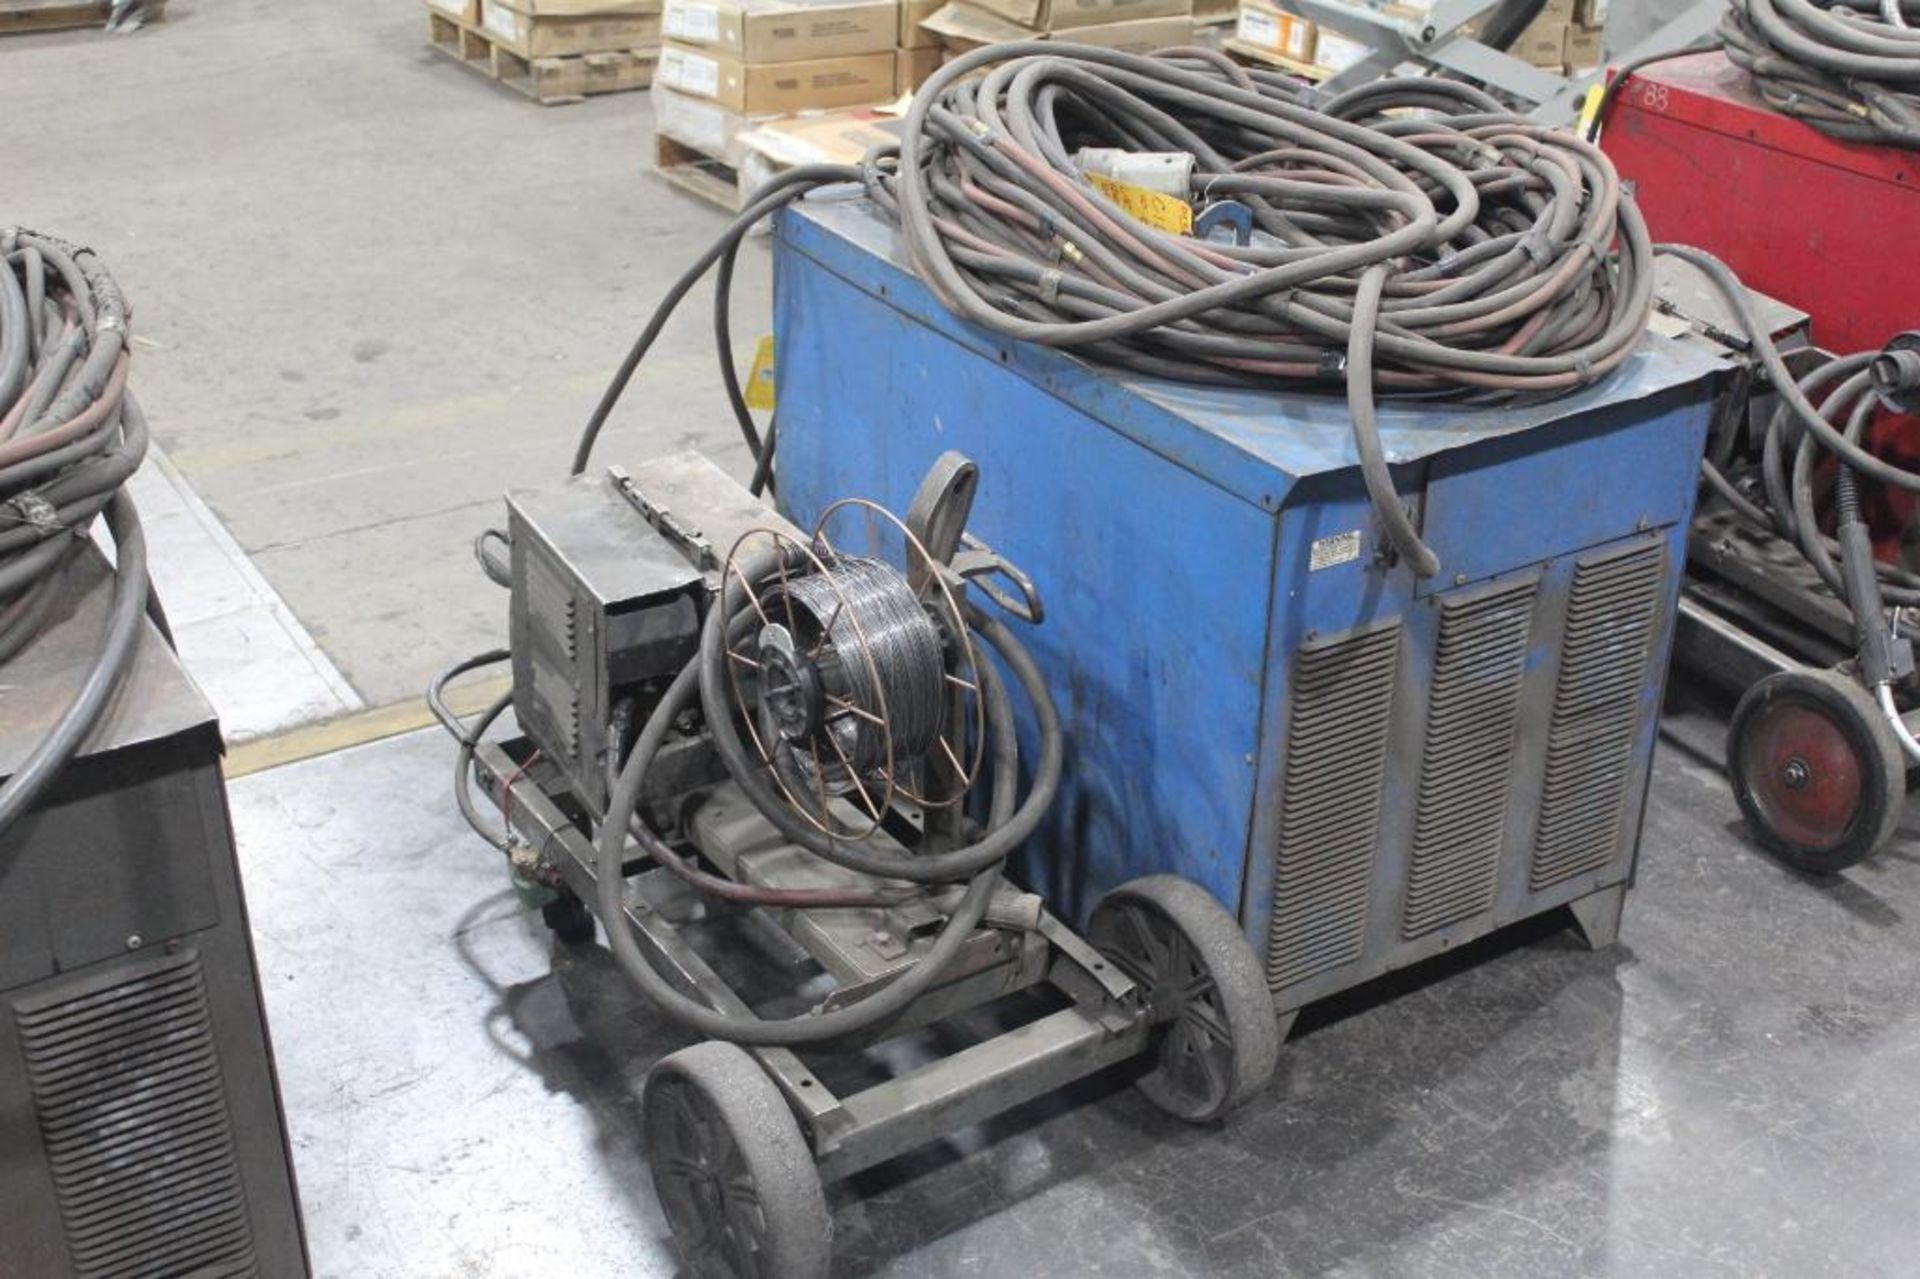 LINCOLN ELECTRIC IDEALARC DC-600 WELDER SN.AC658235 230-460V WITH LN-8 WIRE FEED SN.57089 115V - Image 2 of 10